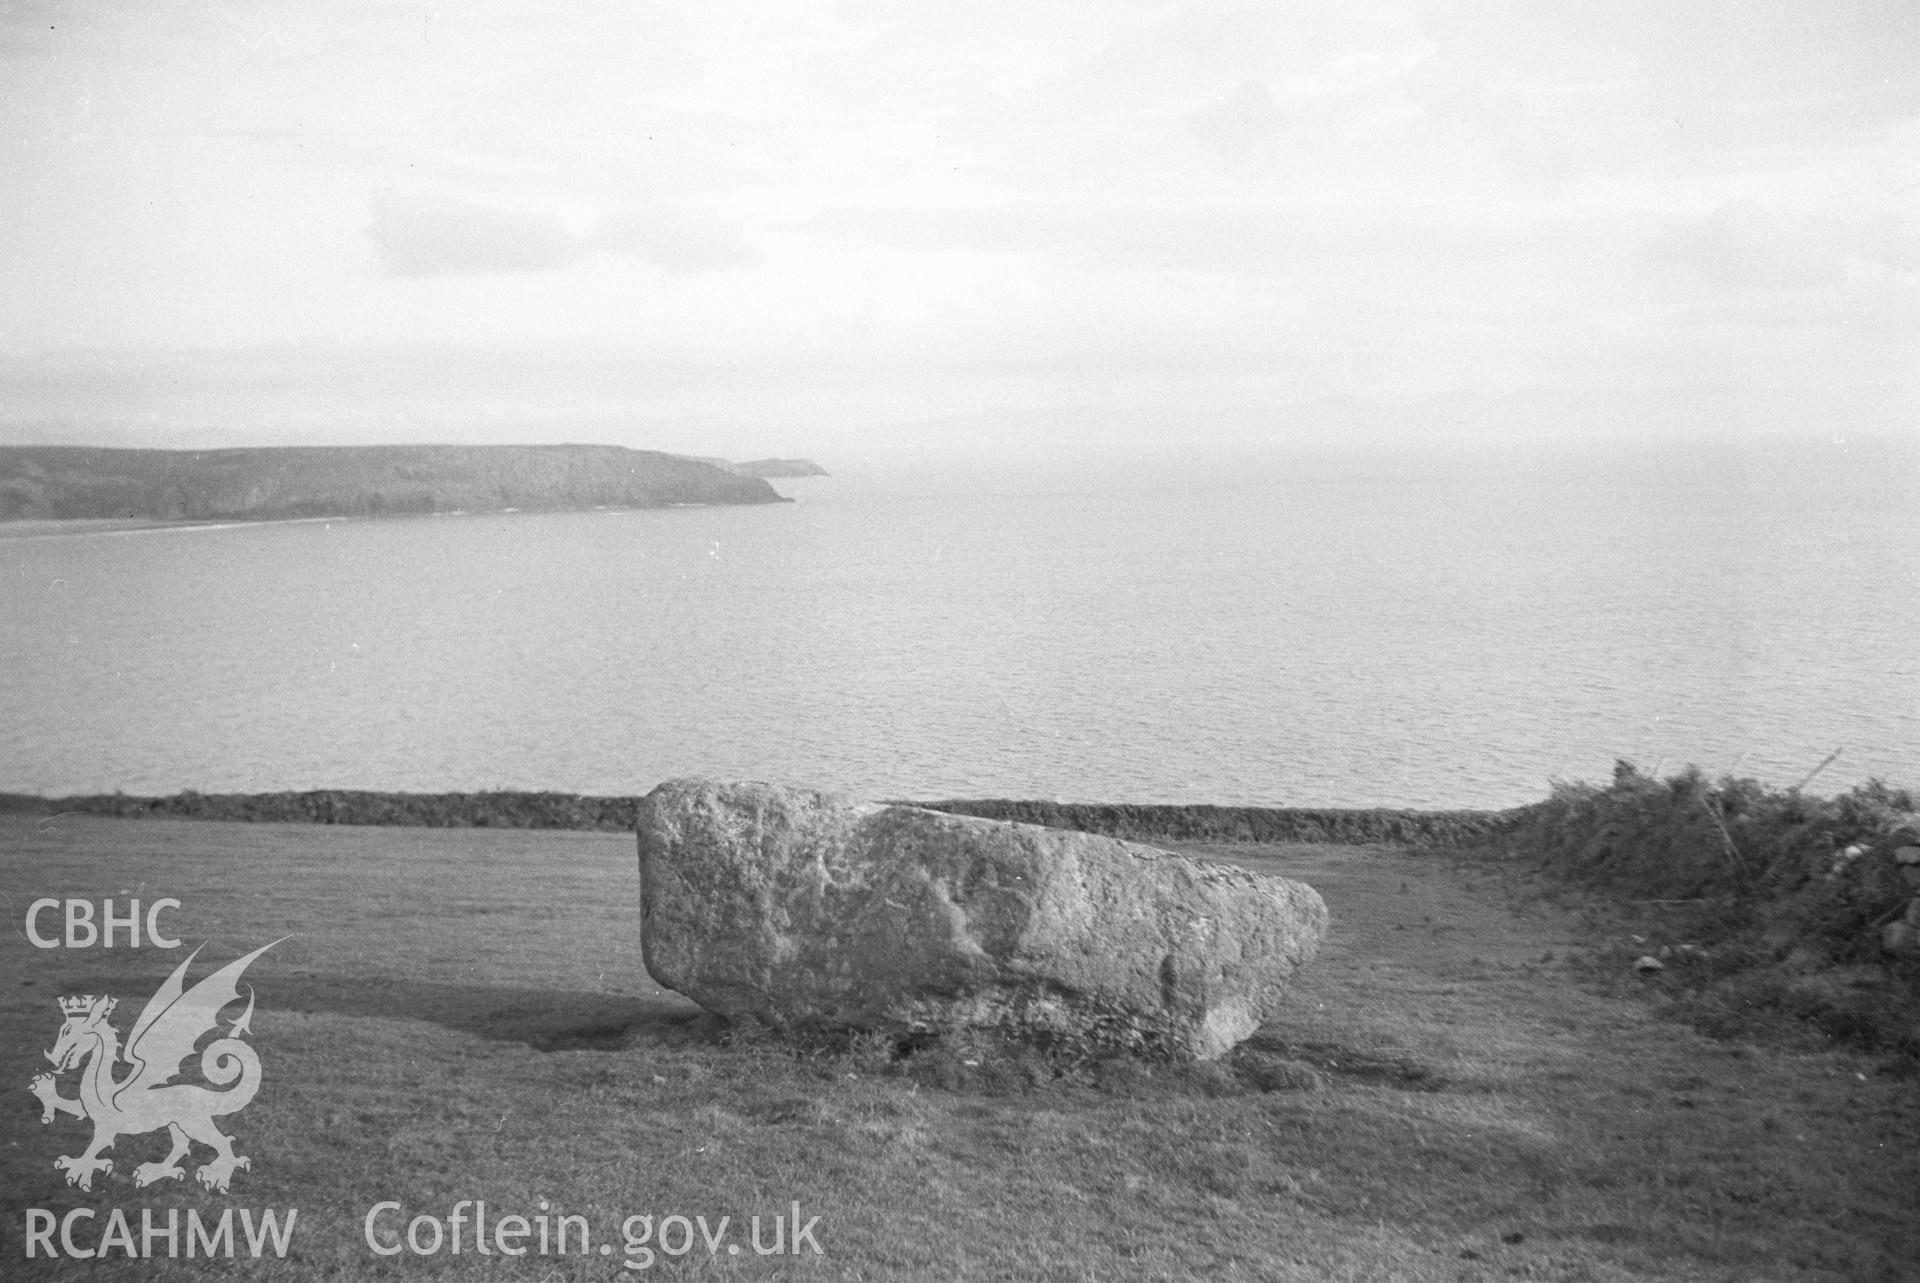 Digital copy of a nitrate negative showing Cilan Uchaf Burial Chamber.